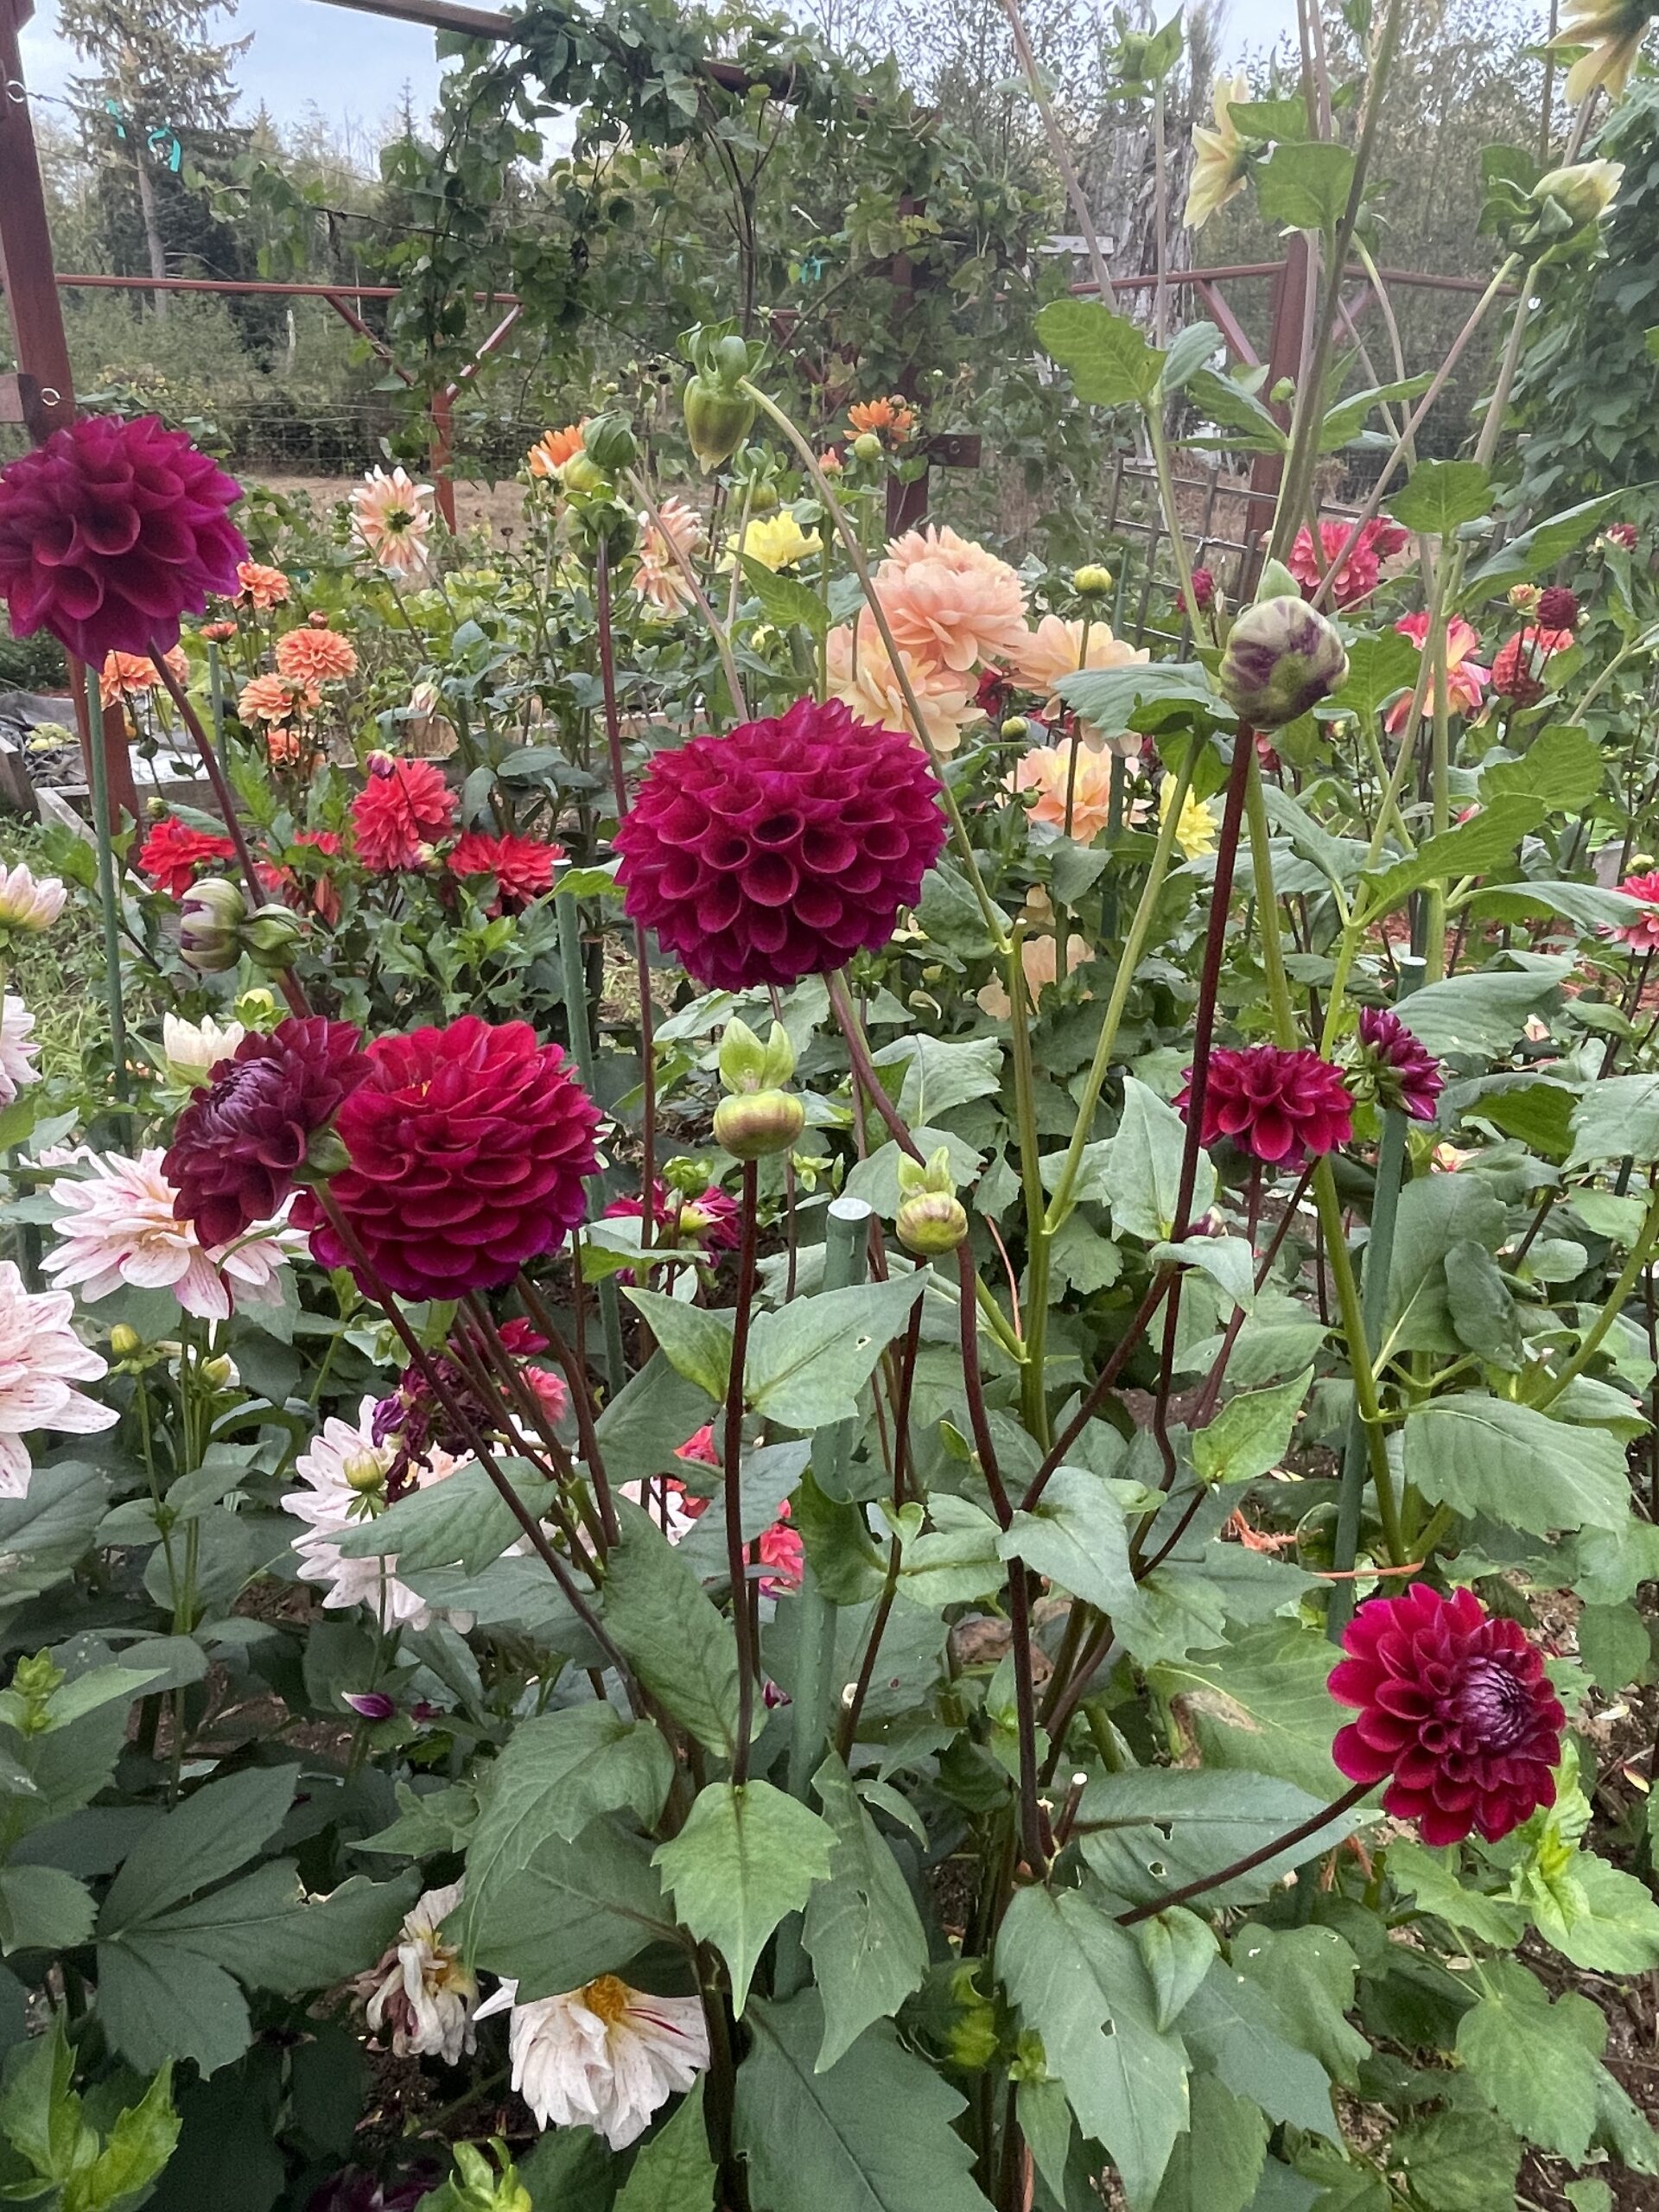 This image shows the plant with several blooms and buds. In the background are other plants. This plant shows Jason Matthews Dahlias. long stems.